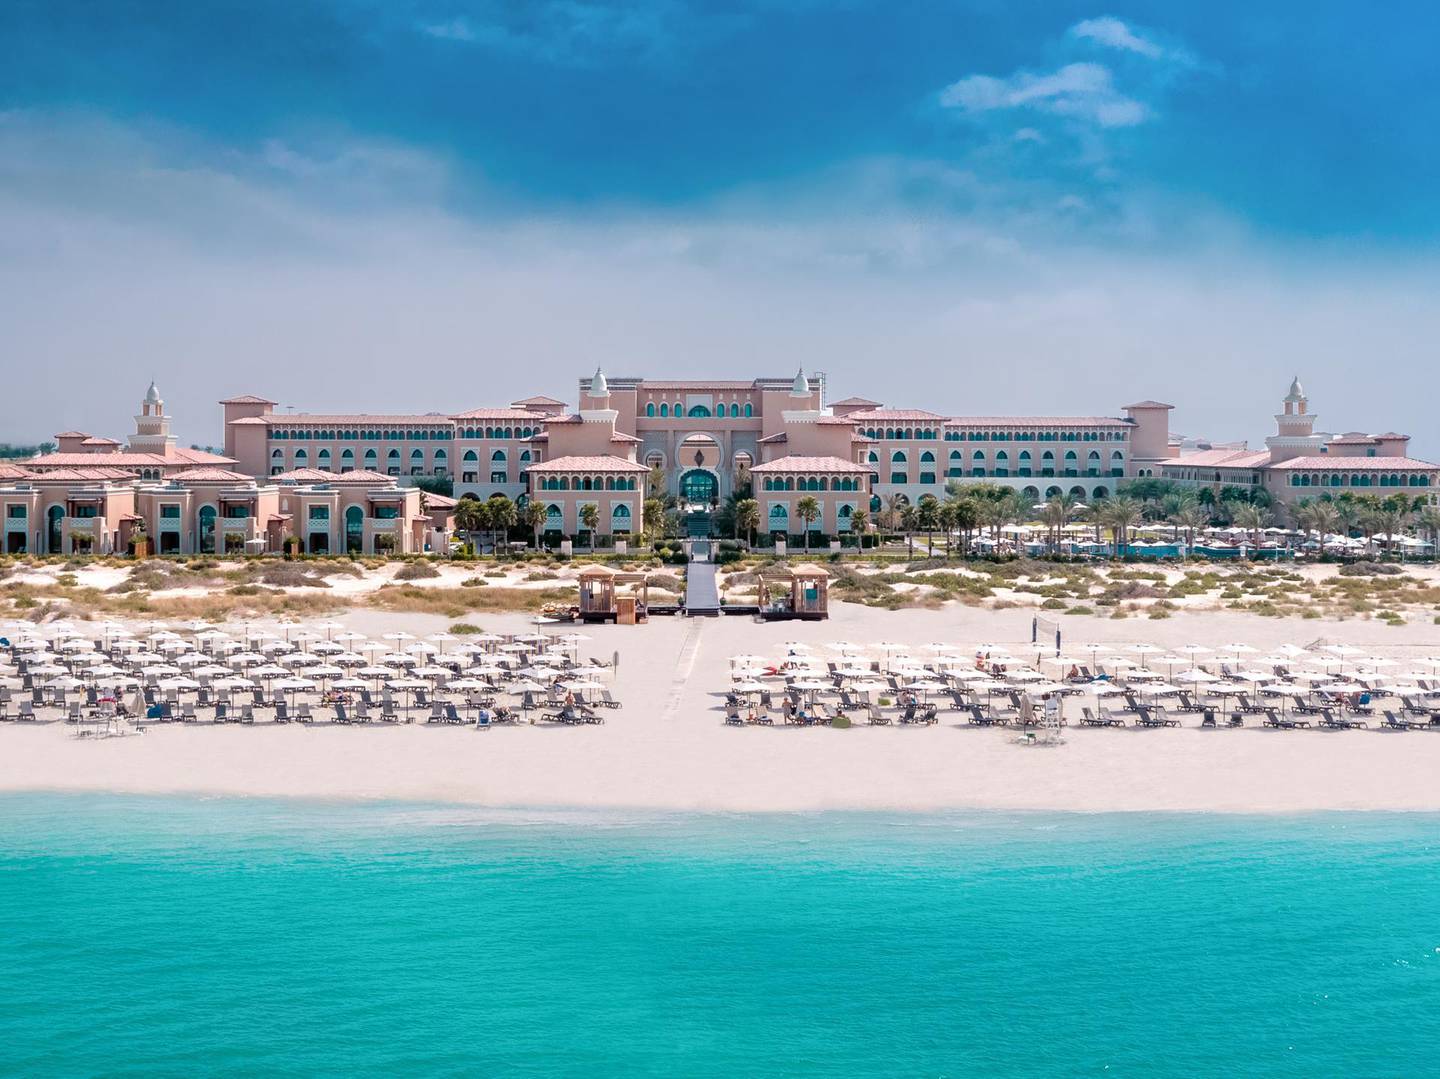 Rixos Premium Saadiyat Island has seen an uptake in bookings since restrictions on hotels eased, especially on weekends when the hotel is operating at capacity. Courtesy Rixos Premium Saadiyat Island